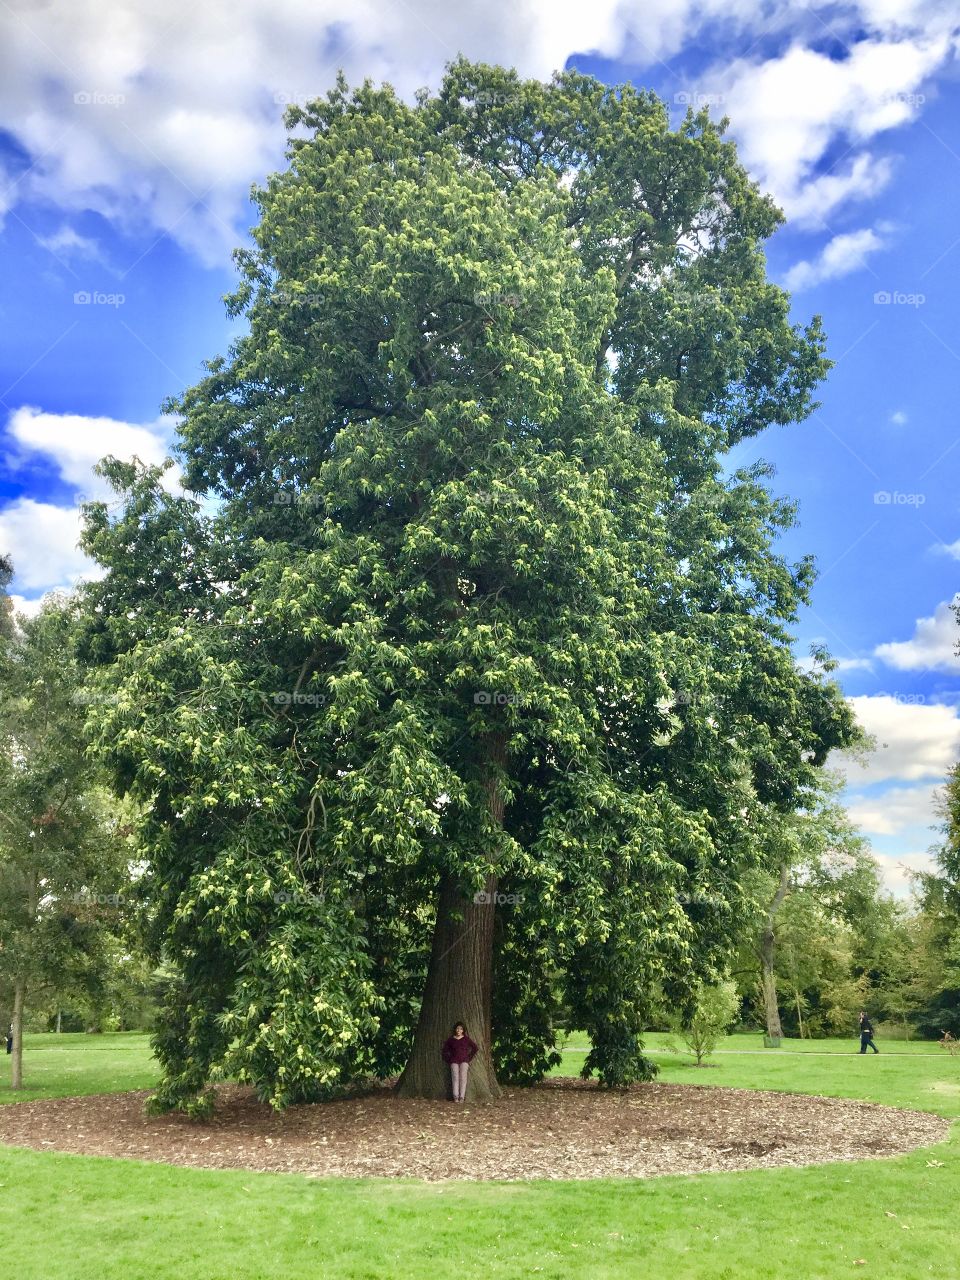 Very big tree and small person, Kew Gardens, London. 